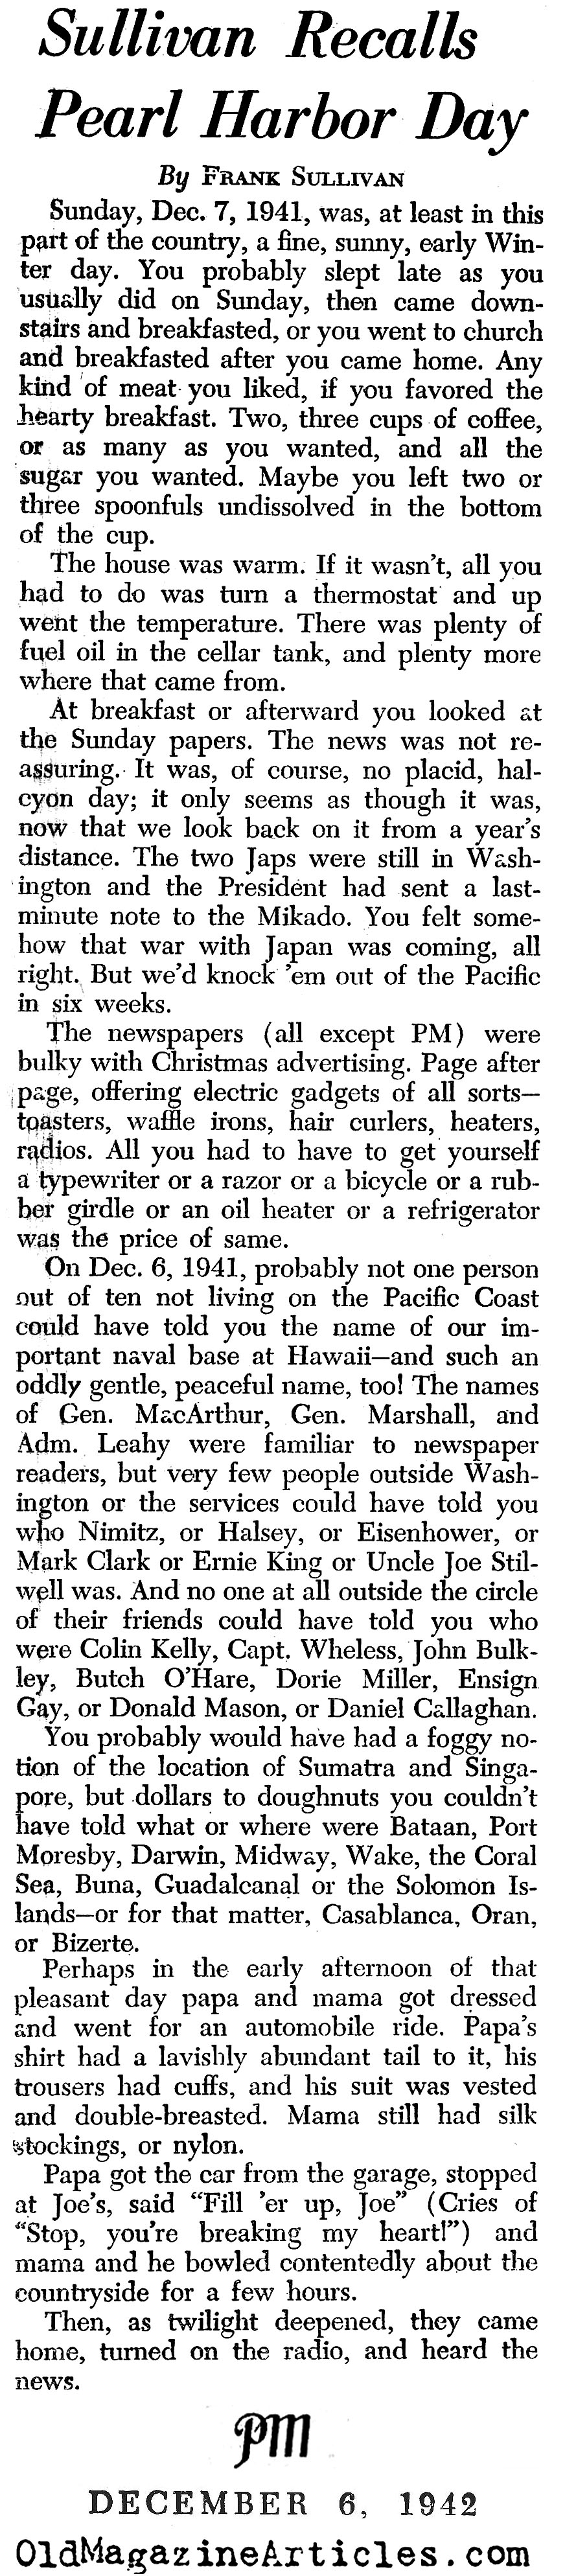 A Pearl Harbor Day Recollection (PM Tabloid, 1942)